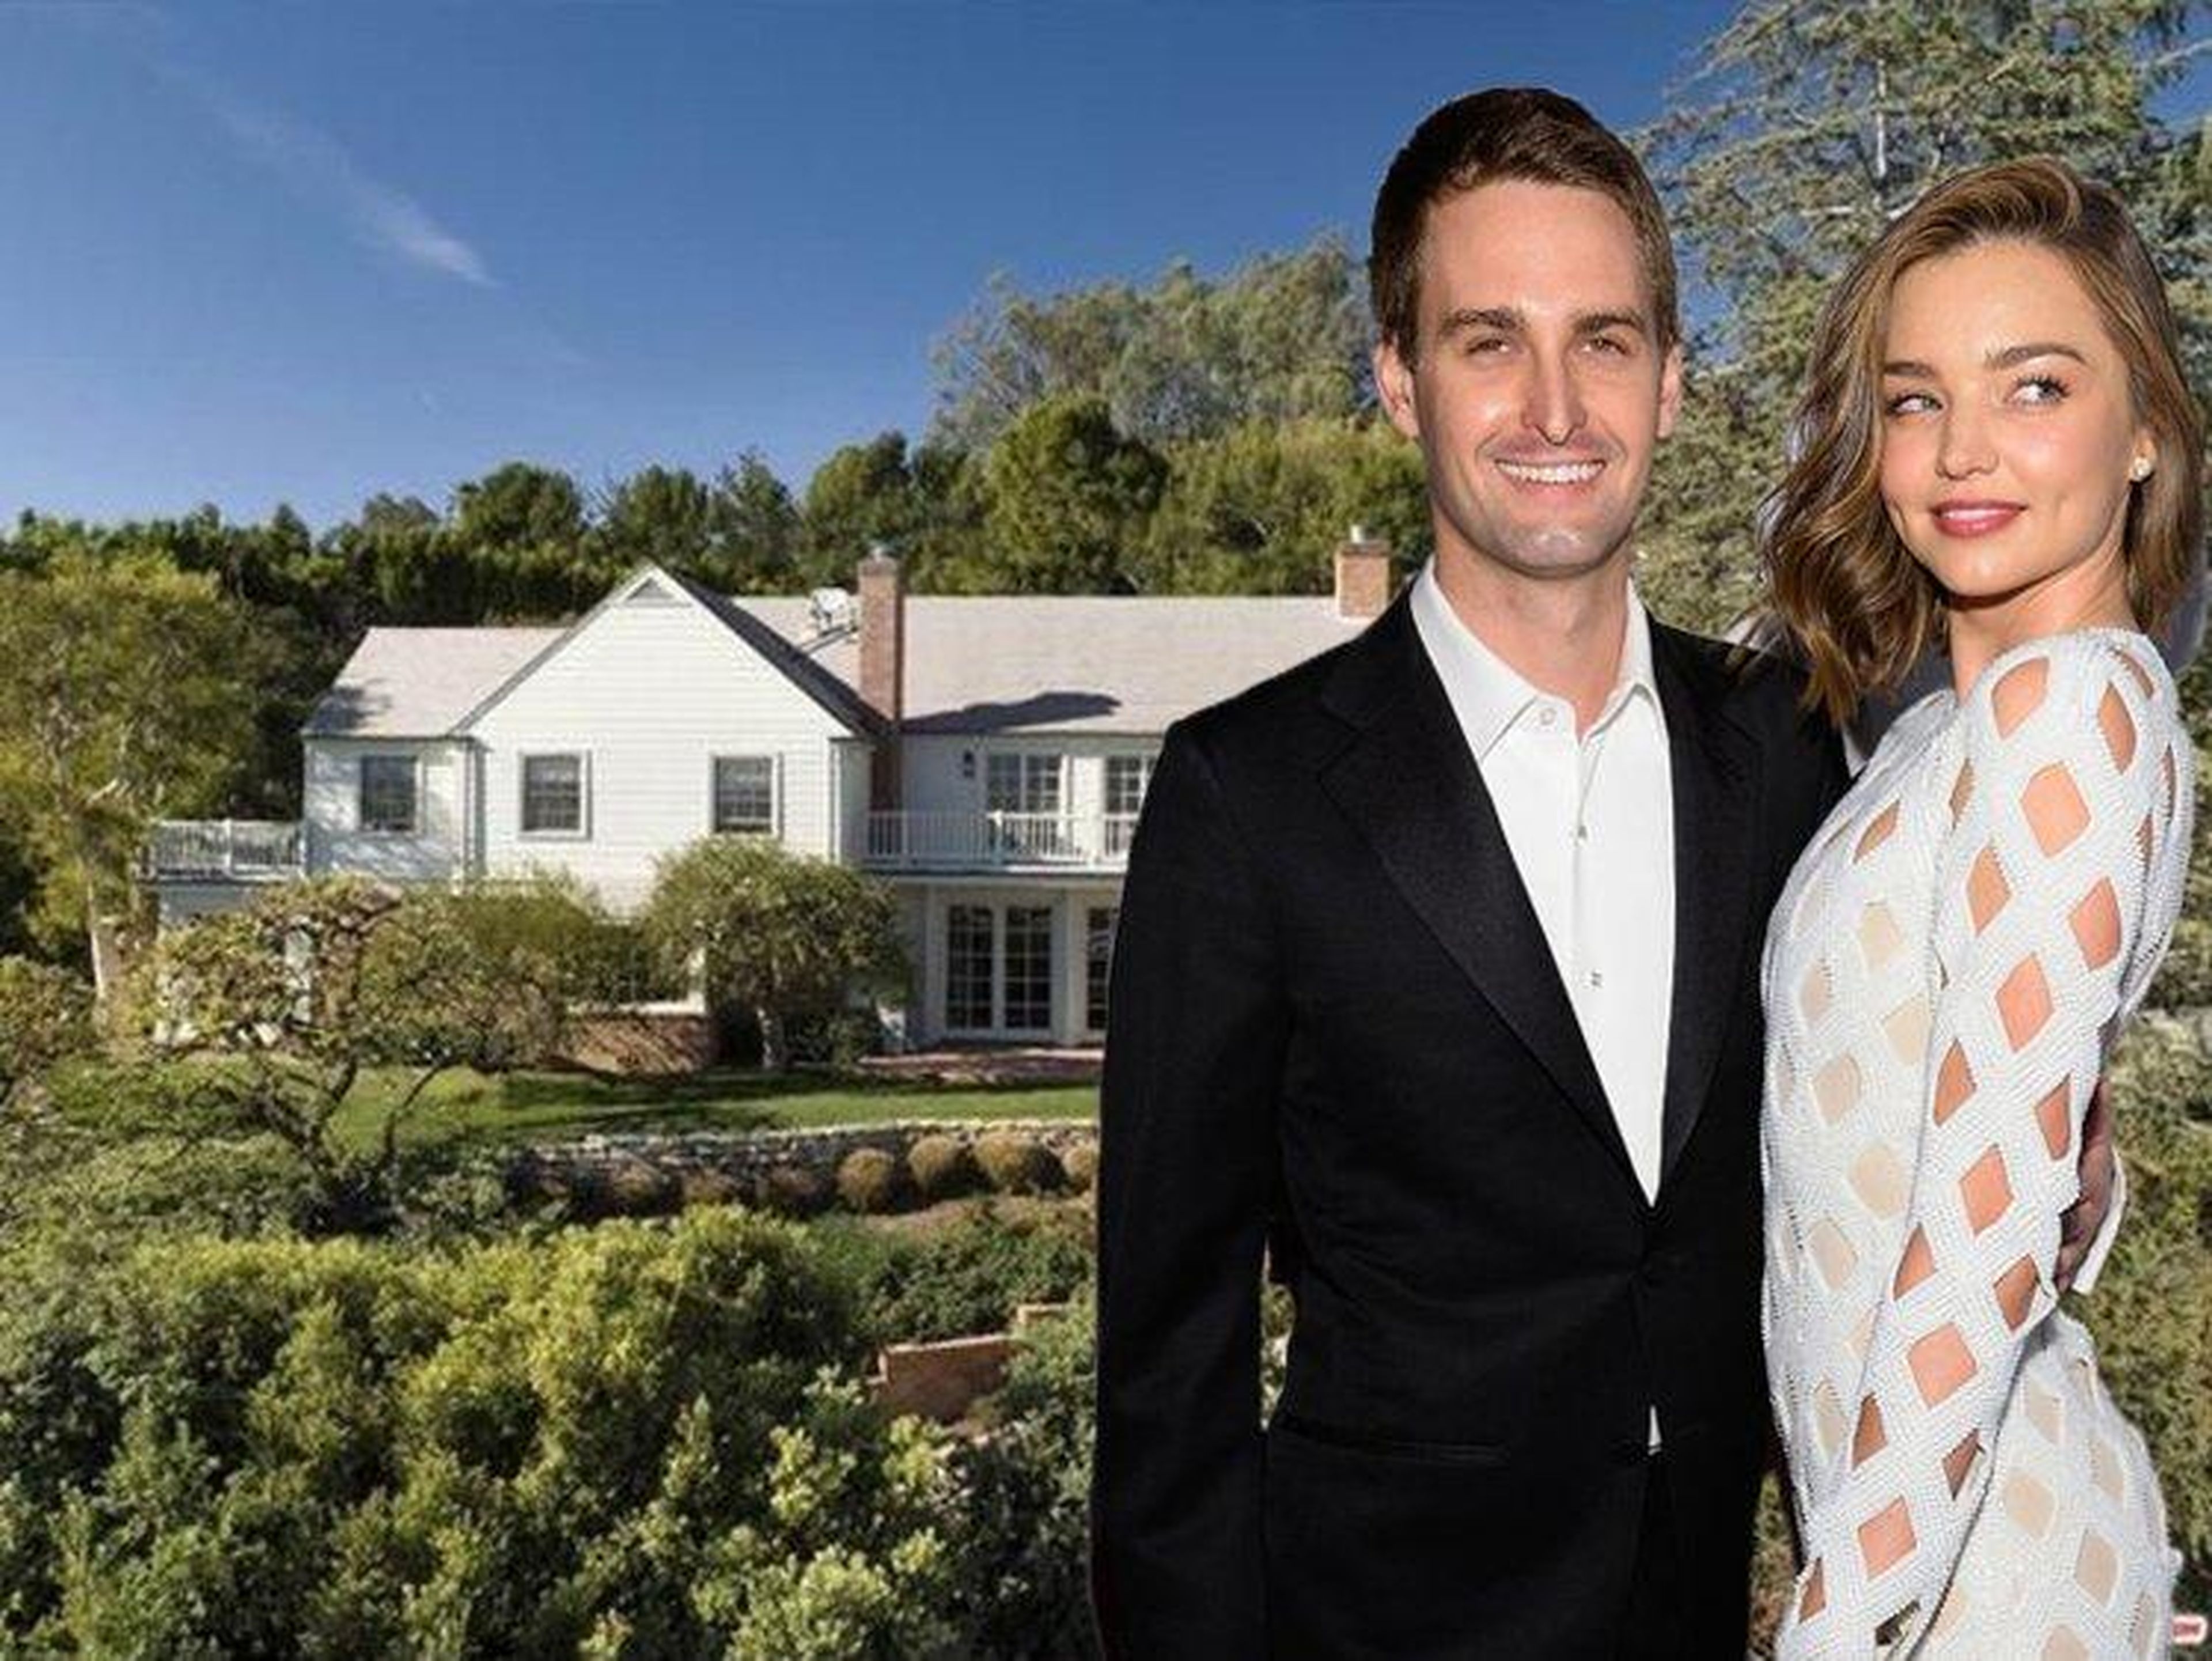 Evan Spiegel also lives in California. He purchased the Los Angeles house he shares with Miranda Kerr, his wife, in 2016 for $12 million, or $12.6 million adjusted for inflation. That's 0.57% of his $2.2 billion net worth.